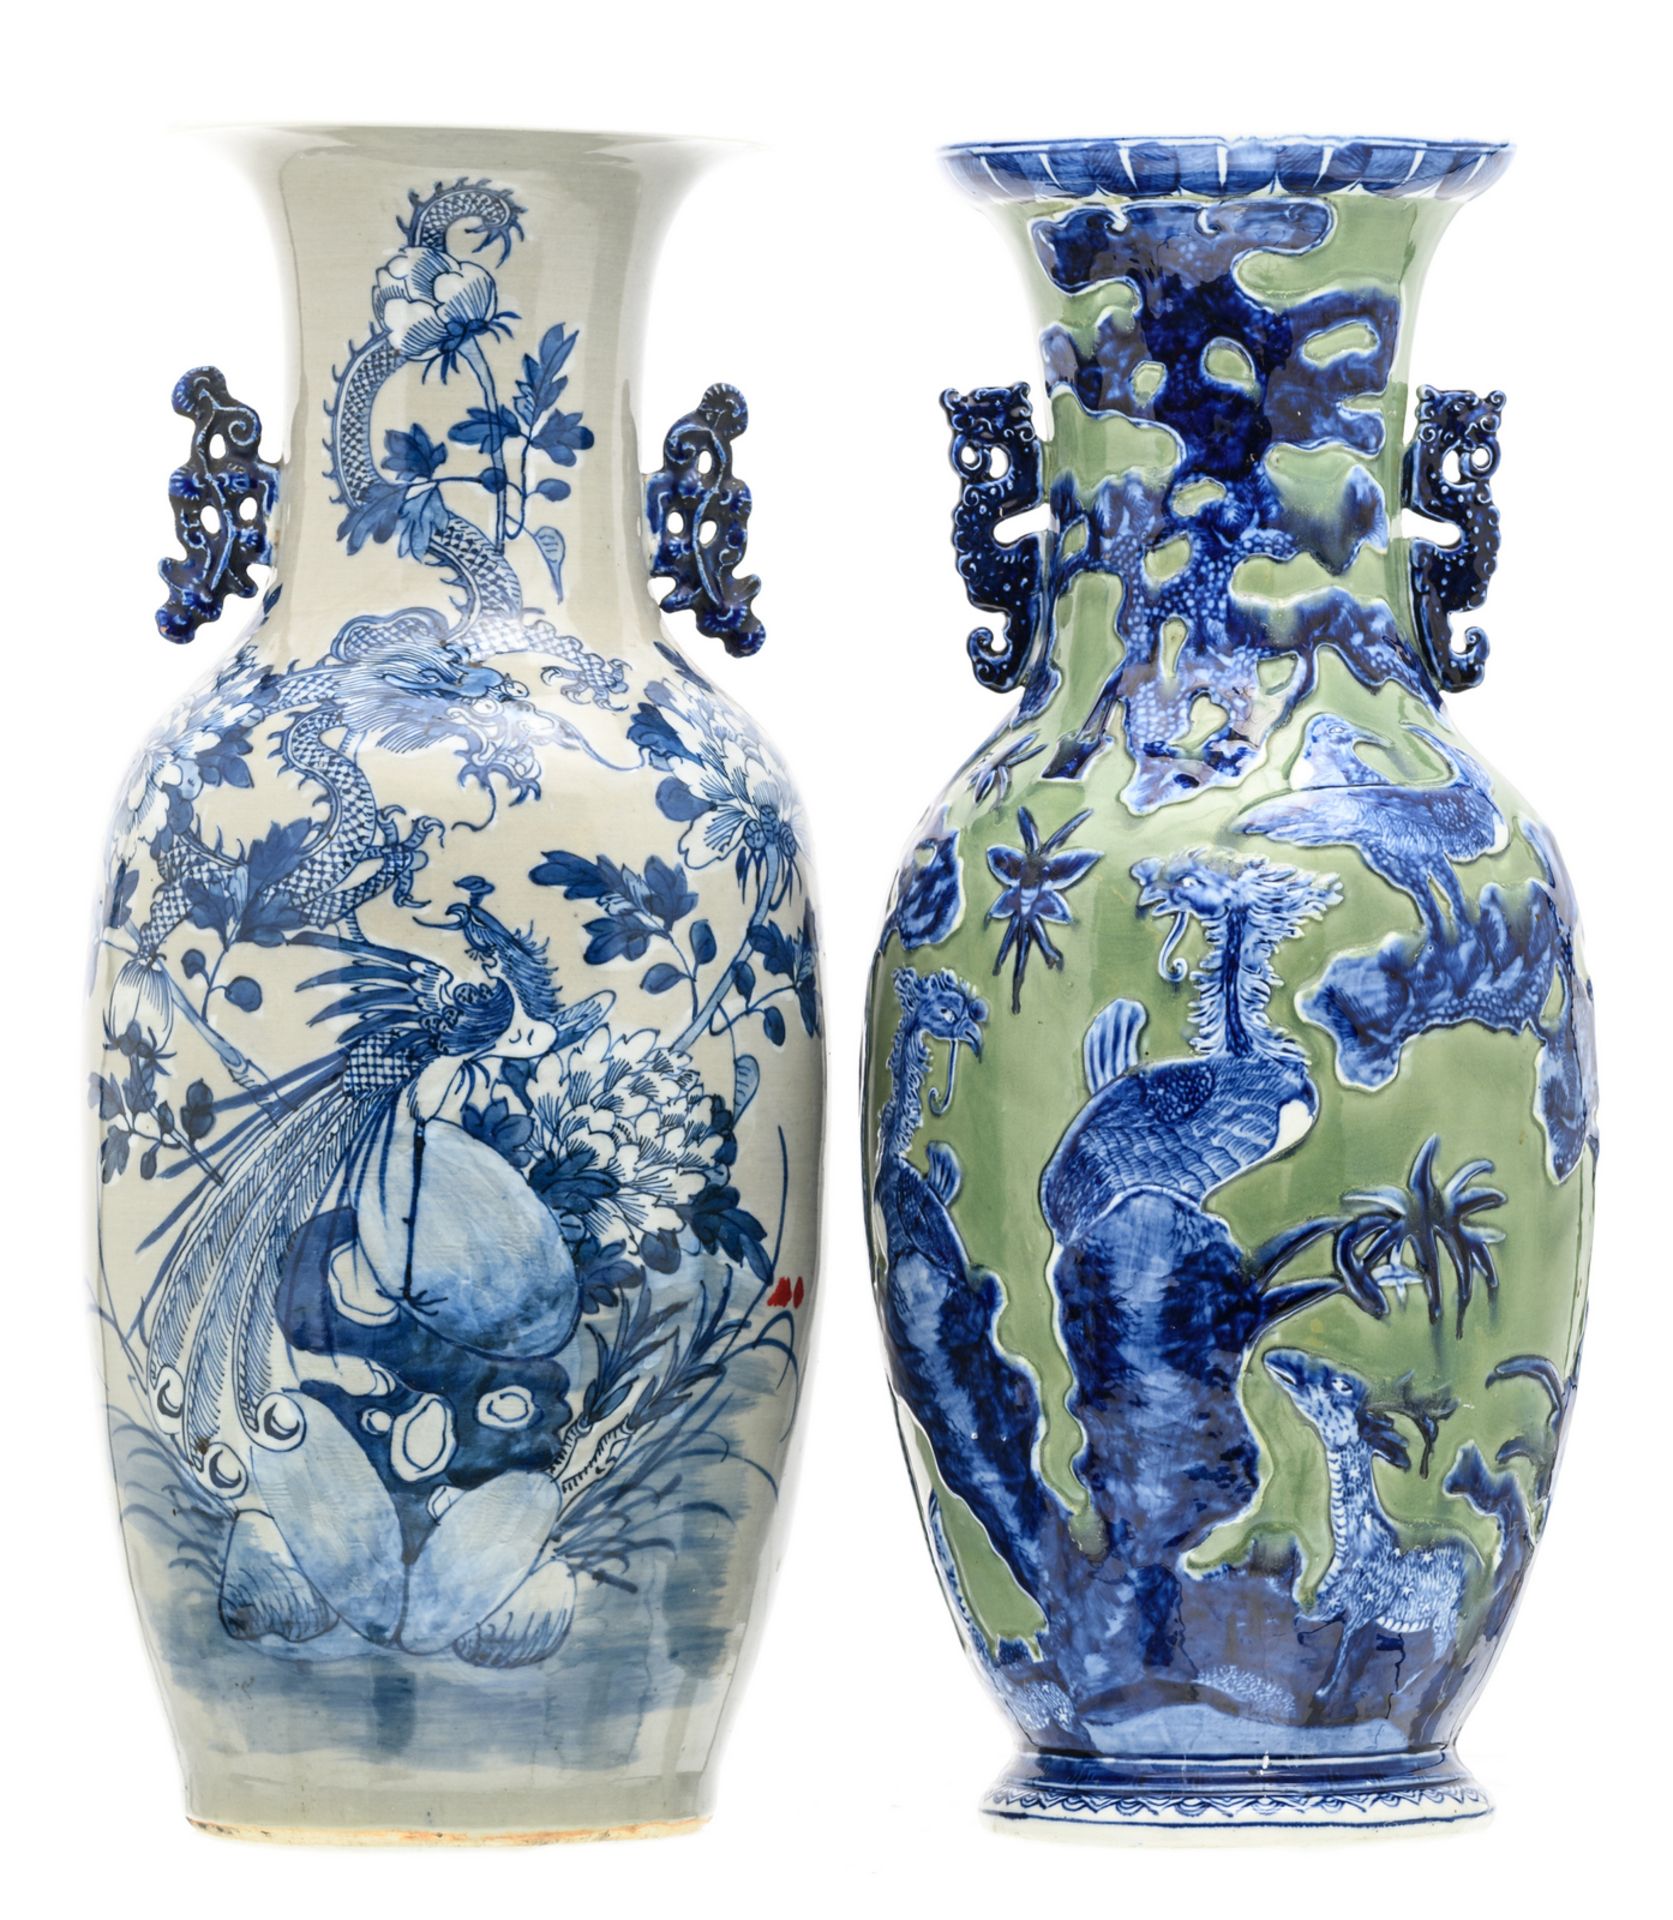 A Chinese grey celadon ground blue and white floral decorated vase with a phoenix and a dragon;